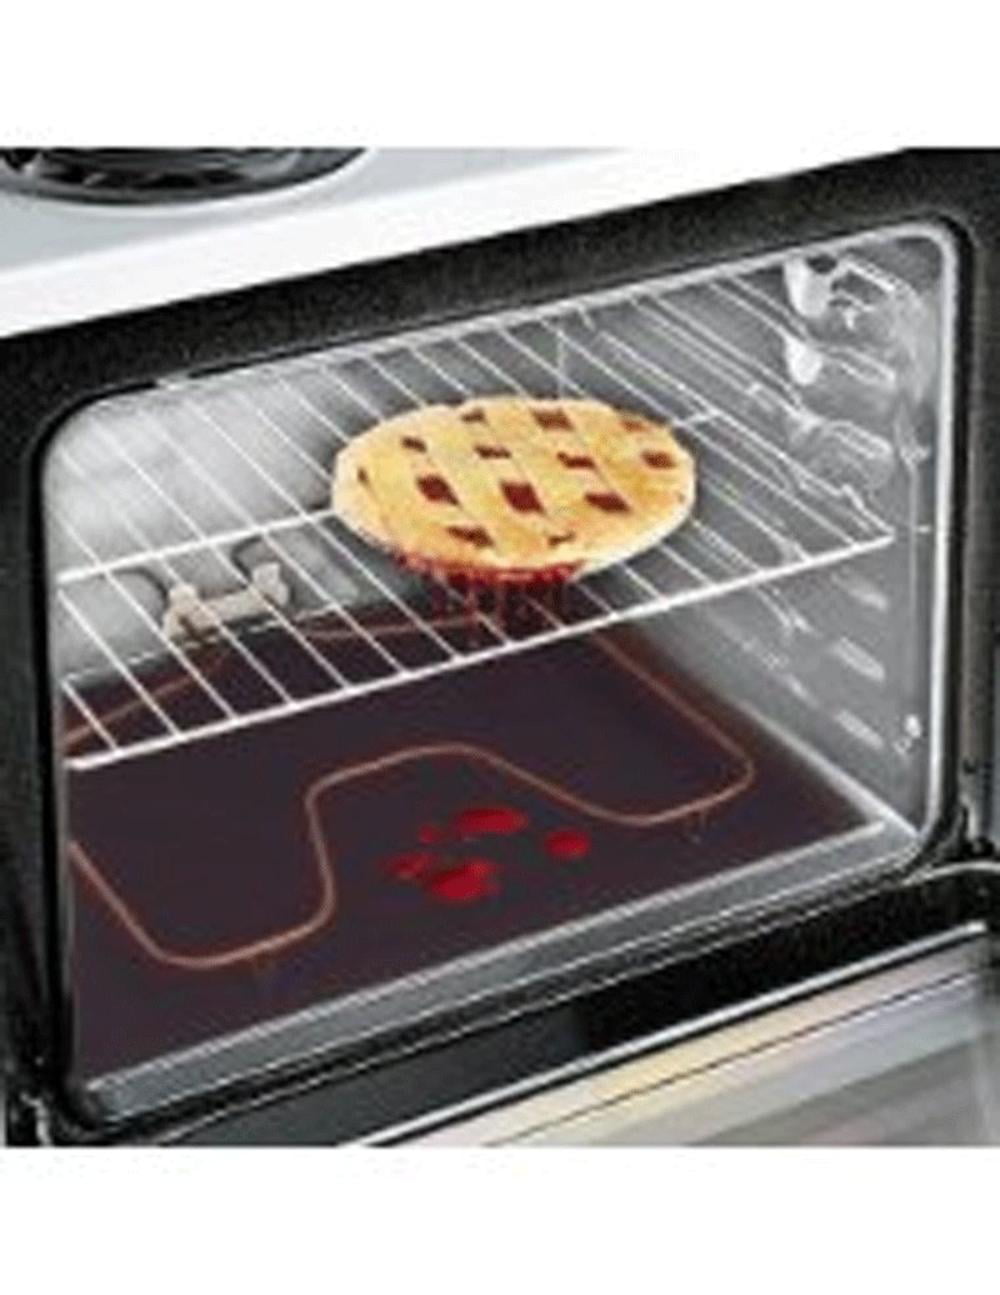 Details about   Non-Stick Oven Liner Large Baking Aide Pads Dishwasher Safe Reusable Spill Mats 